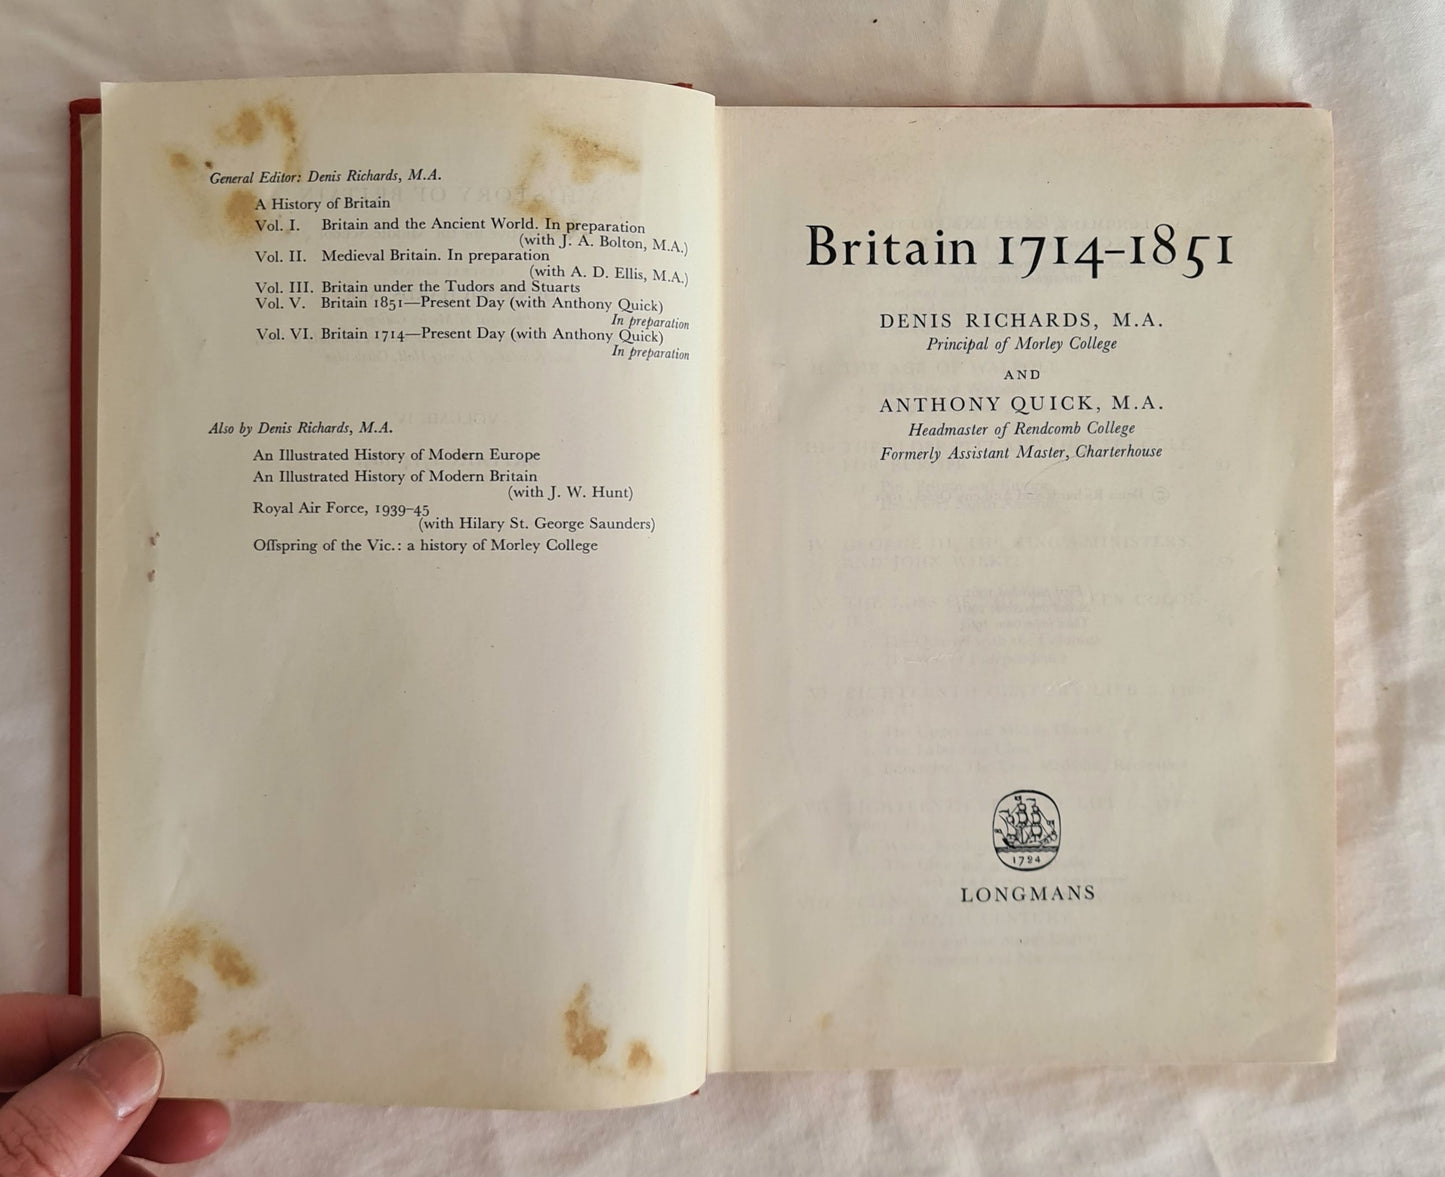 Britain 1714-1851 by Denis Richards and Anthony Quick